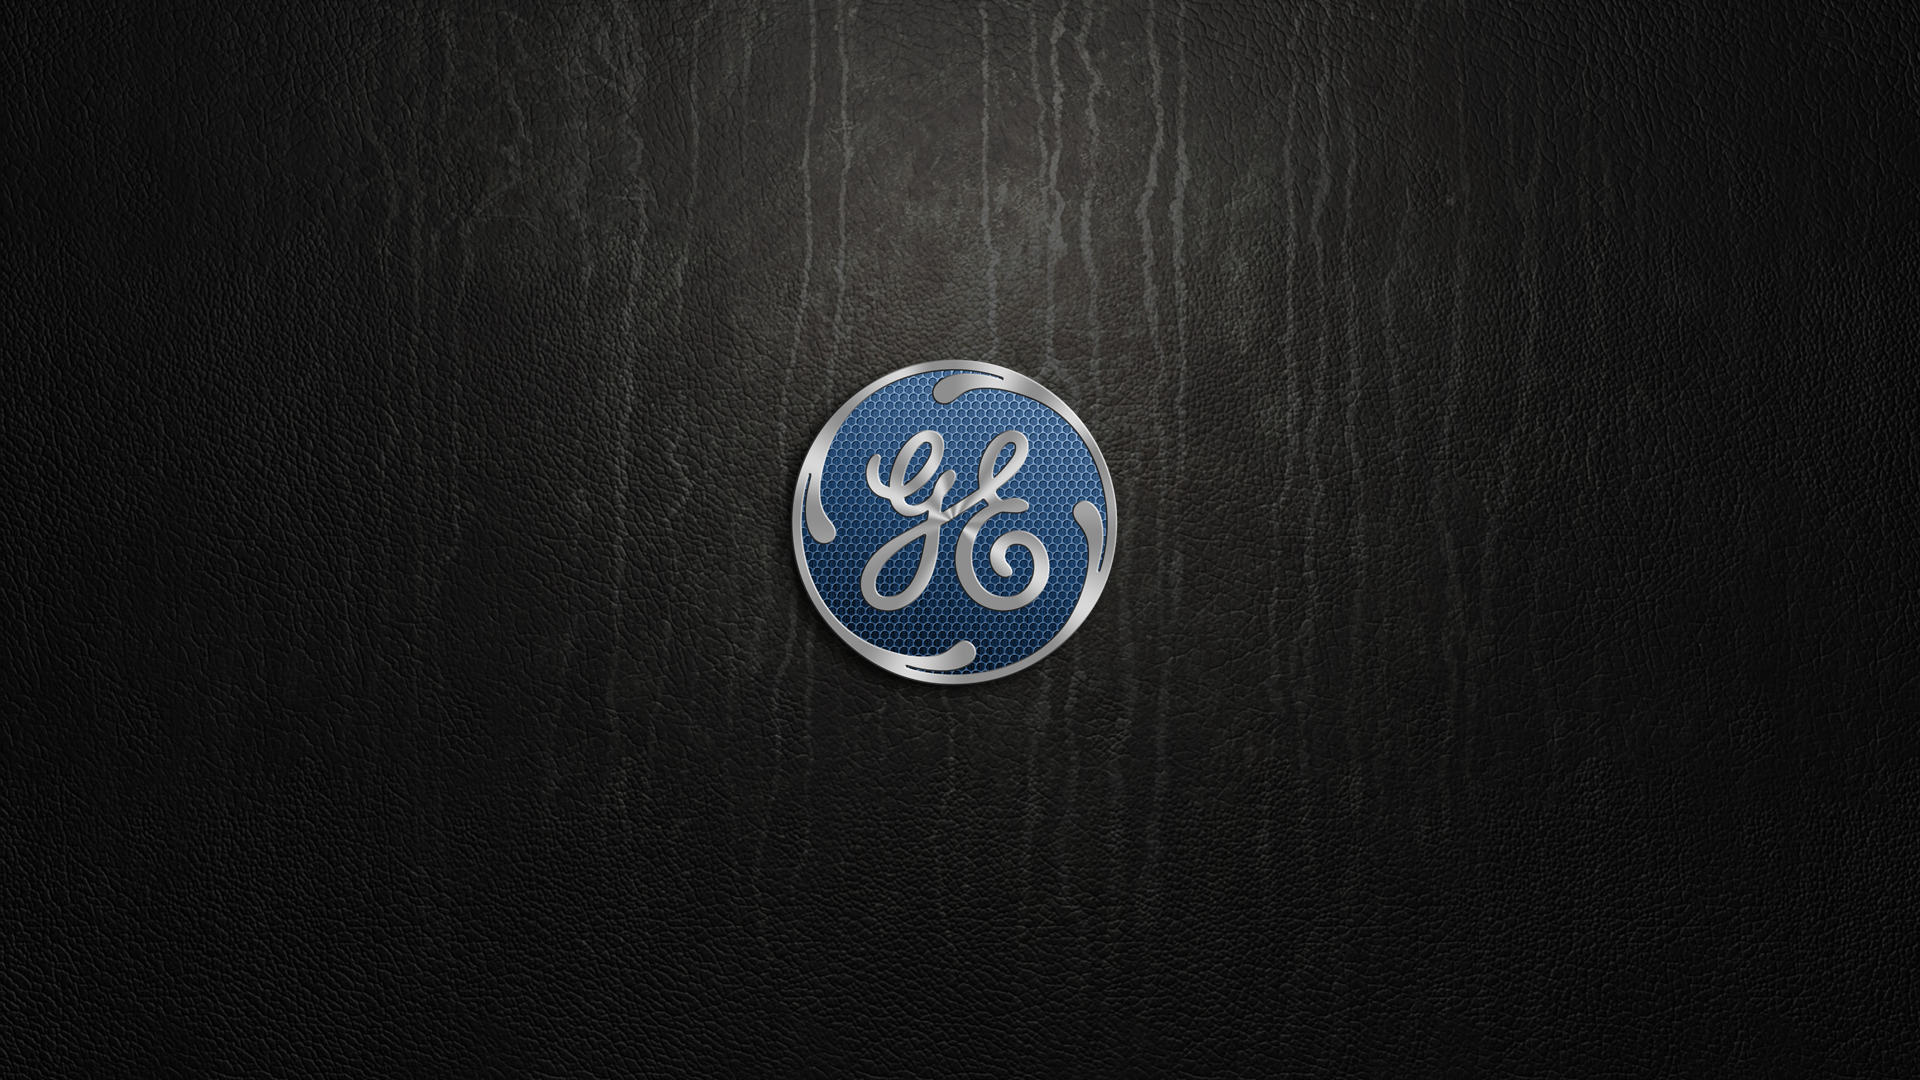 General Electric HD Wallpaper and Background Image